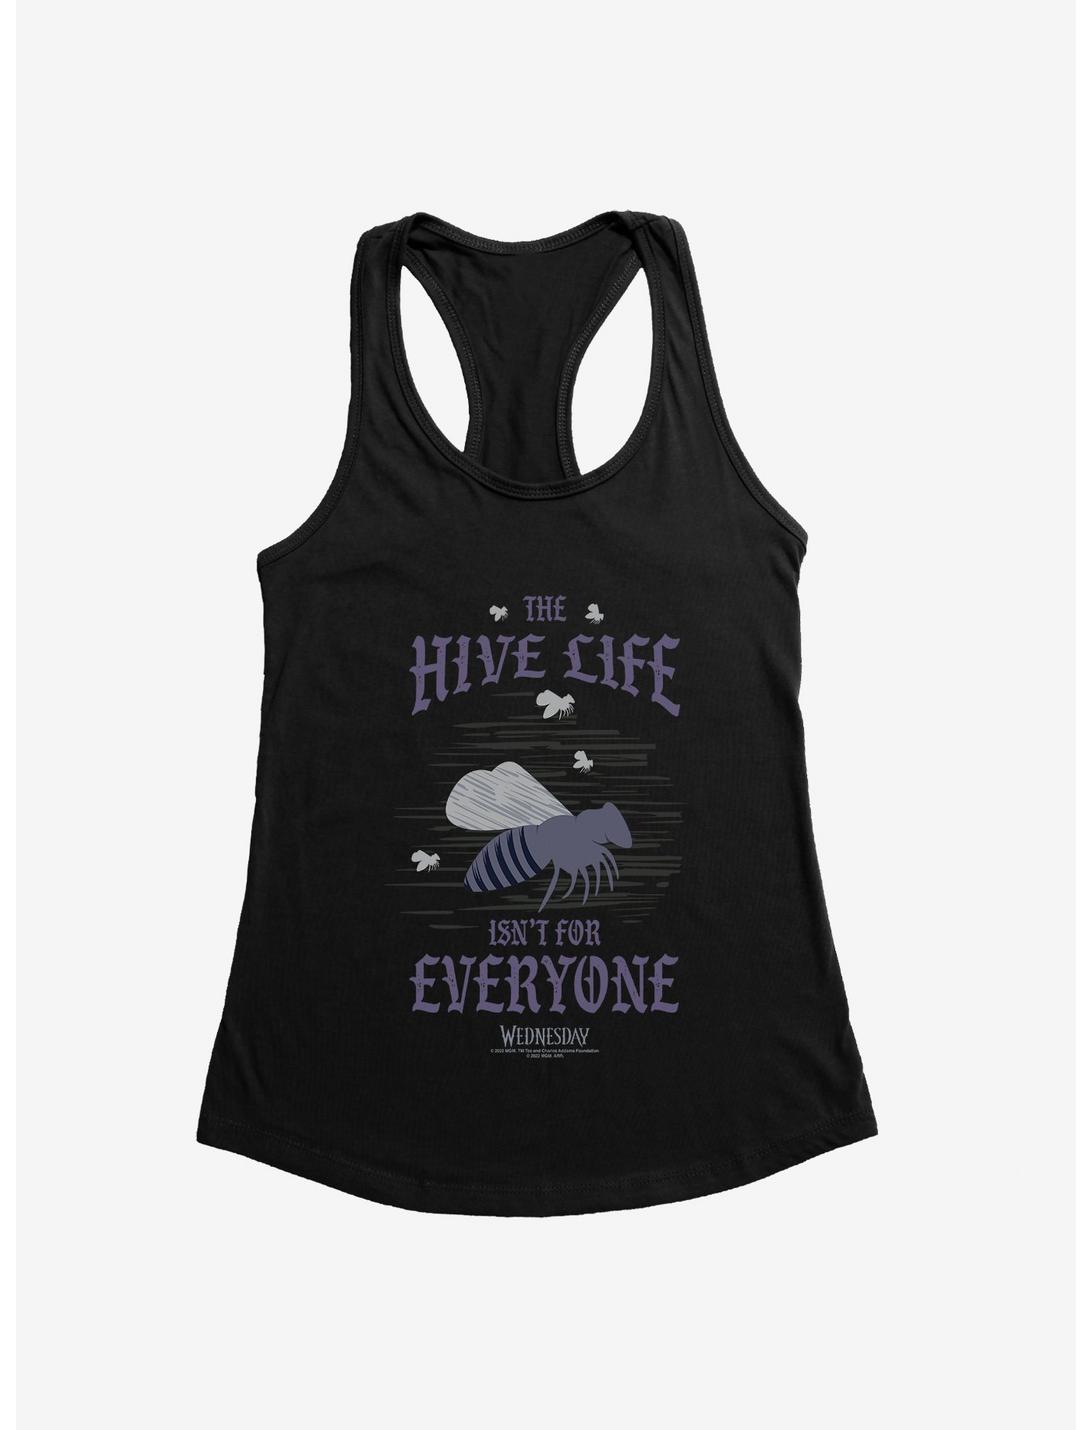 Wednesday The Hive Life Isn't For Everyone Womens Tank Top, BLACK, hi-res